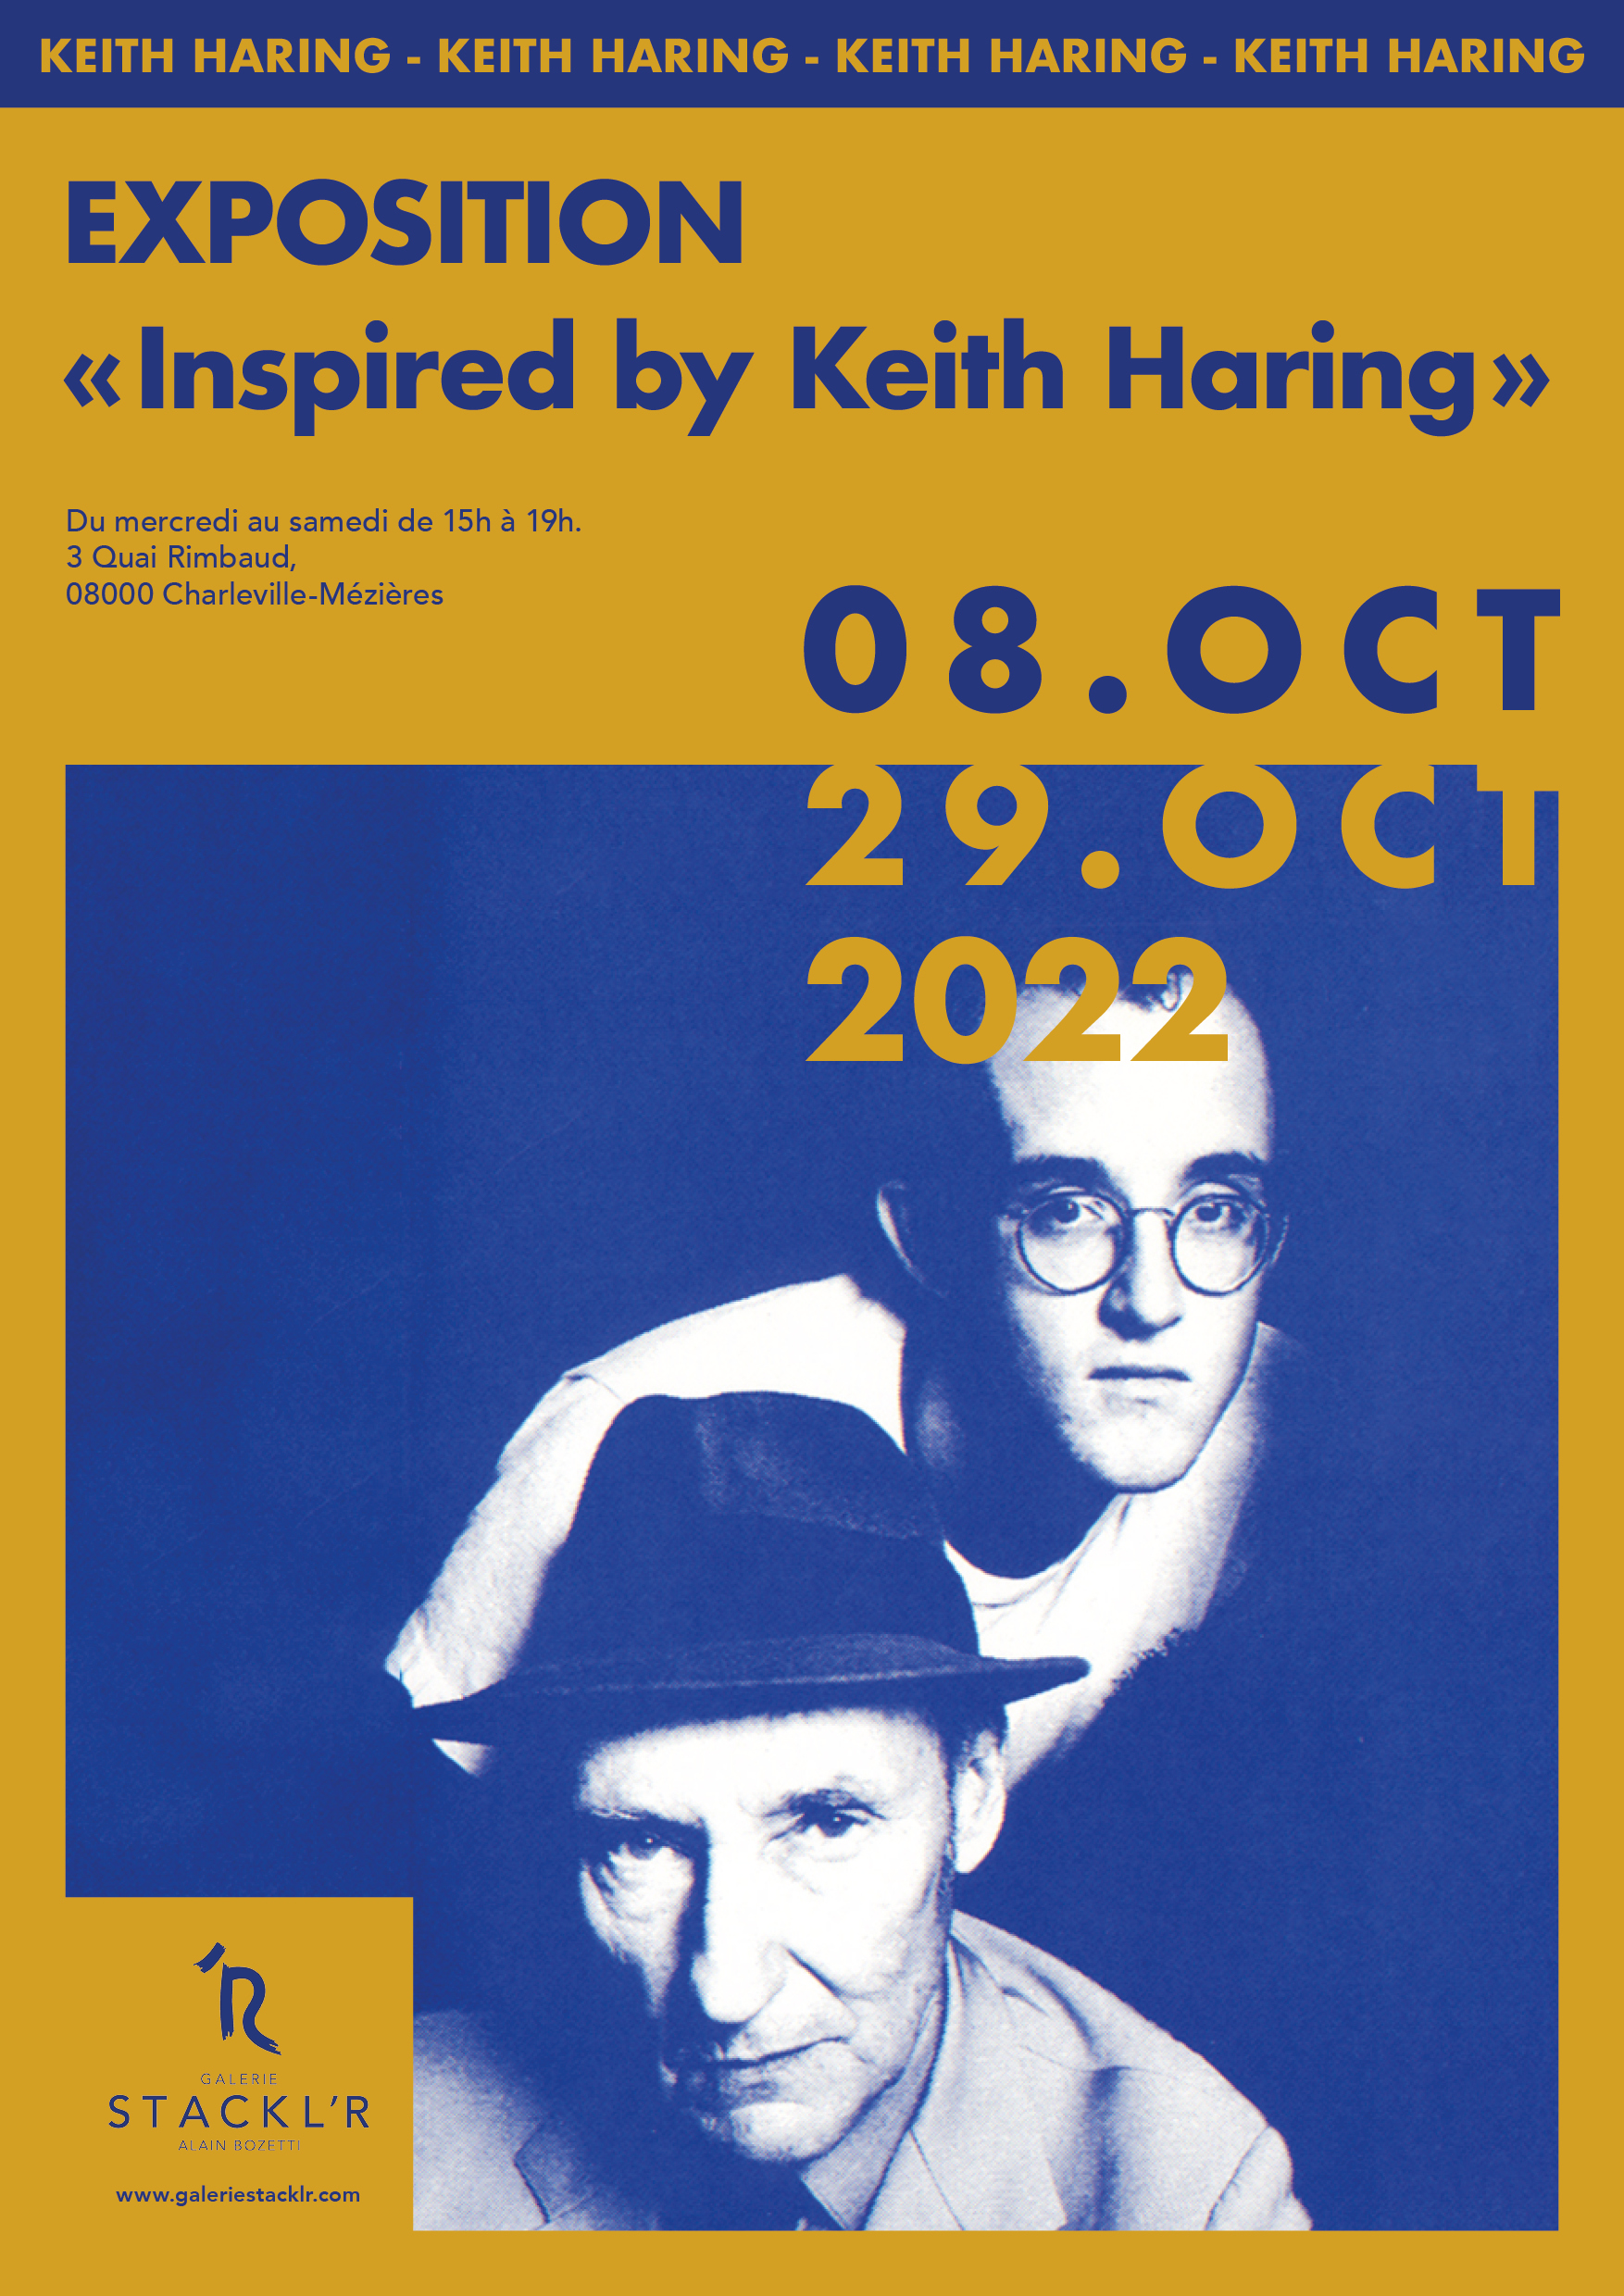 Exposition - Keith Haring